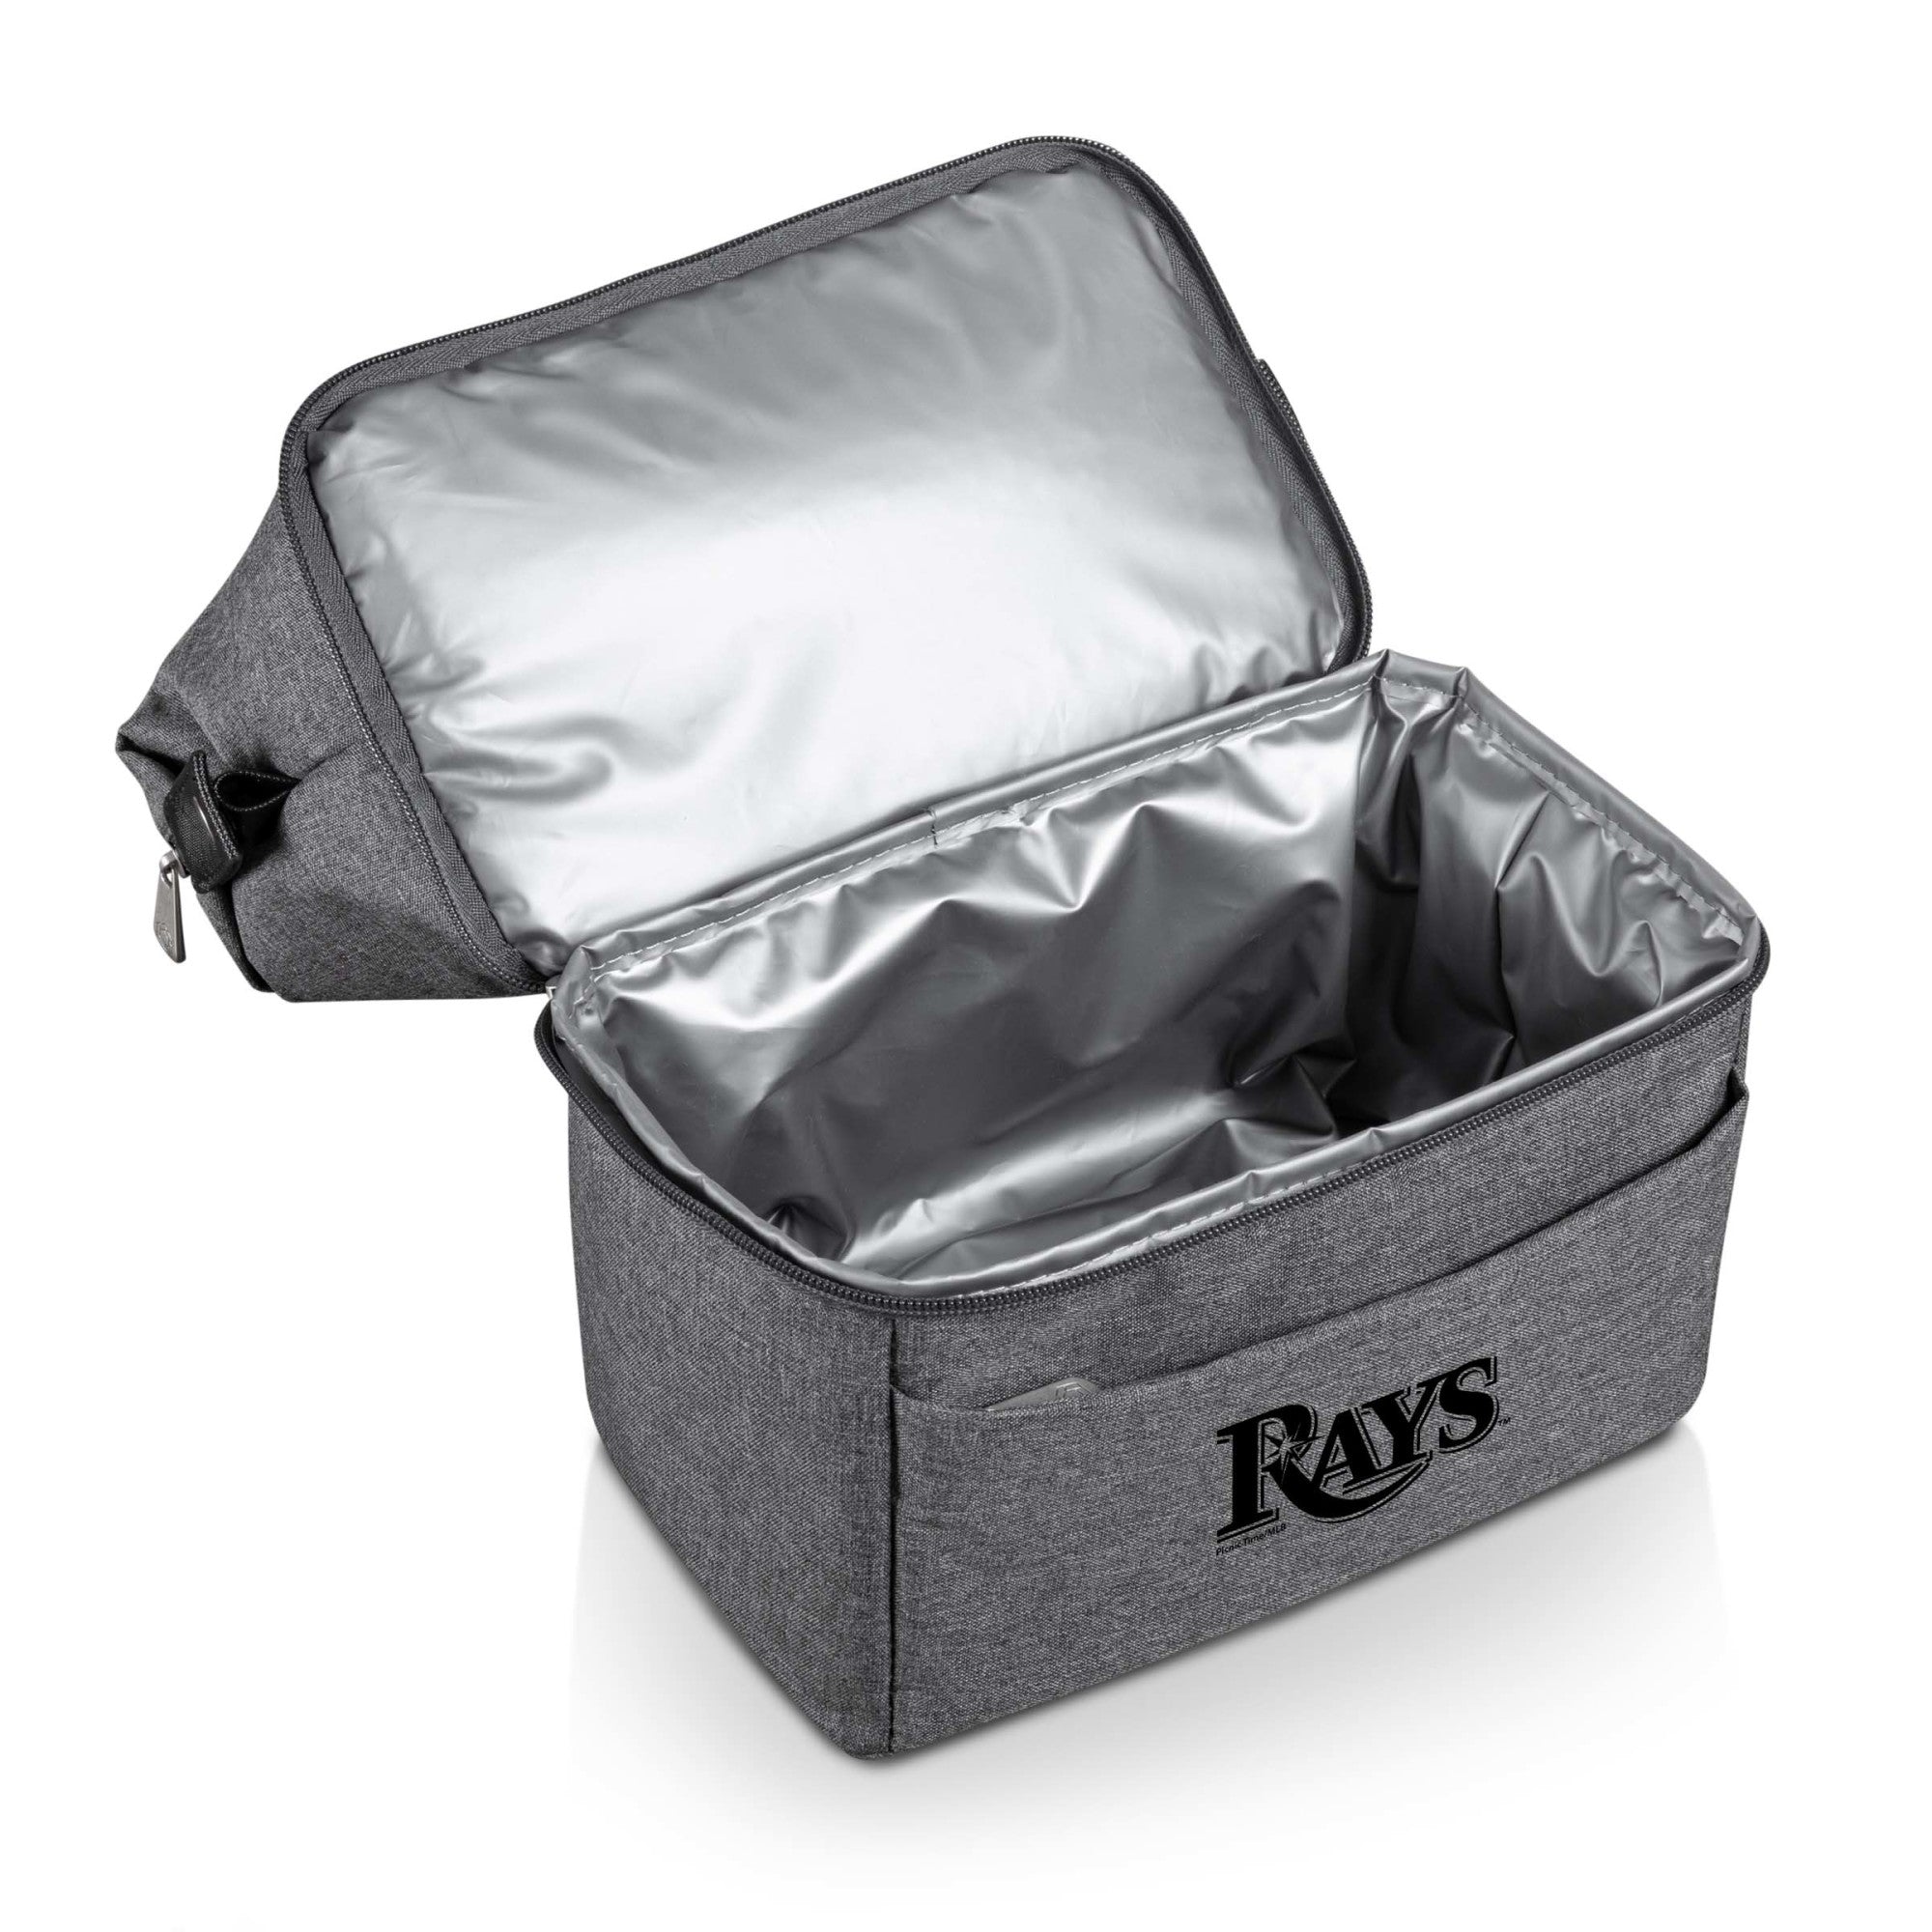 Tampa Bay Rays - Urban Lunch Bag Cooler